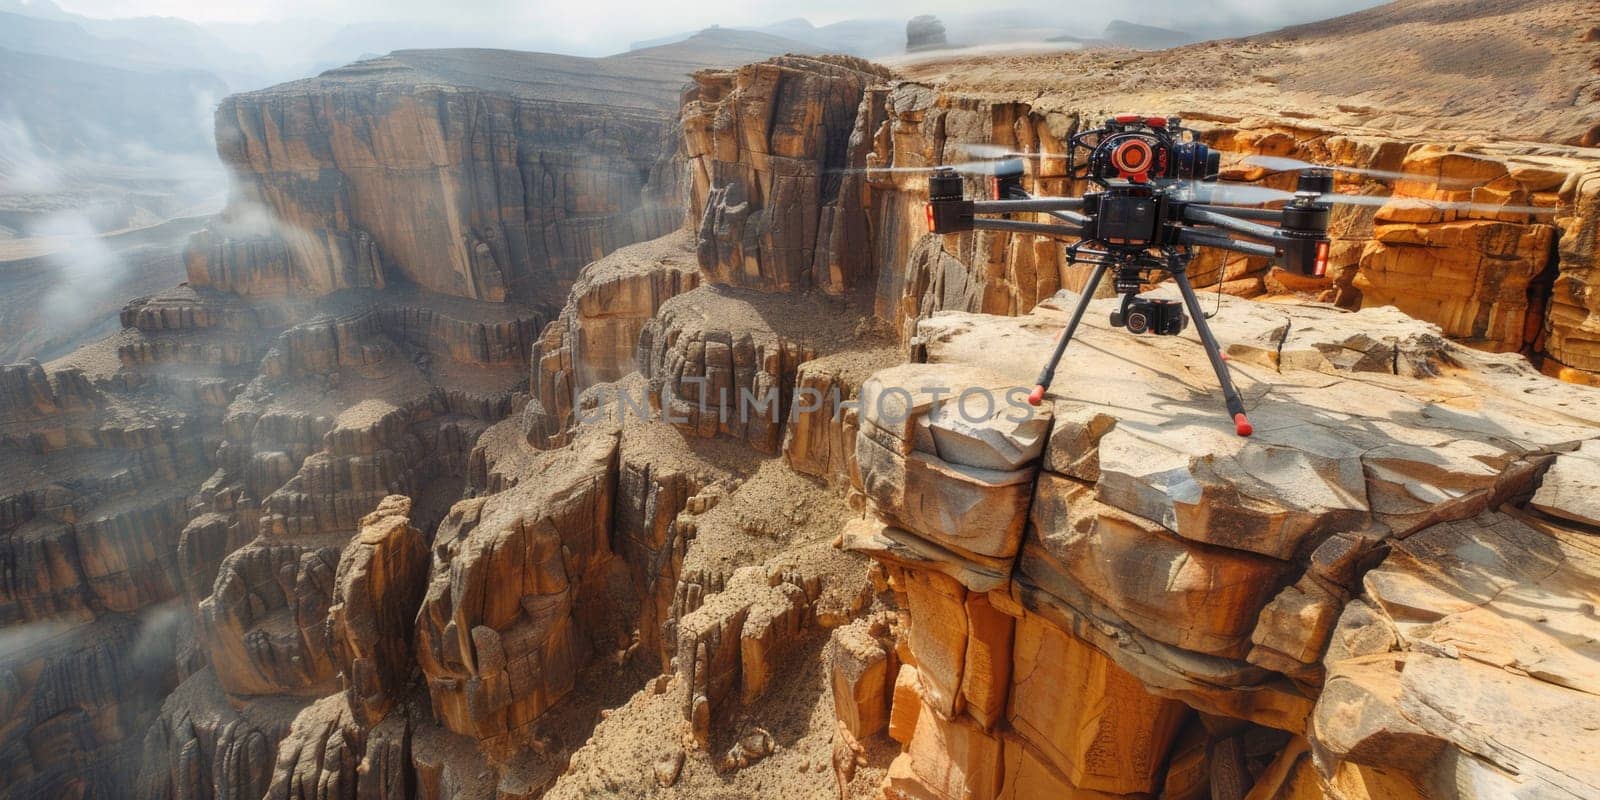 A camera is positioned on the edge of a cliff, overlooking a vast landscape below.